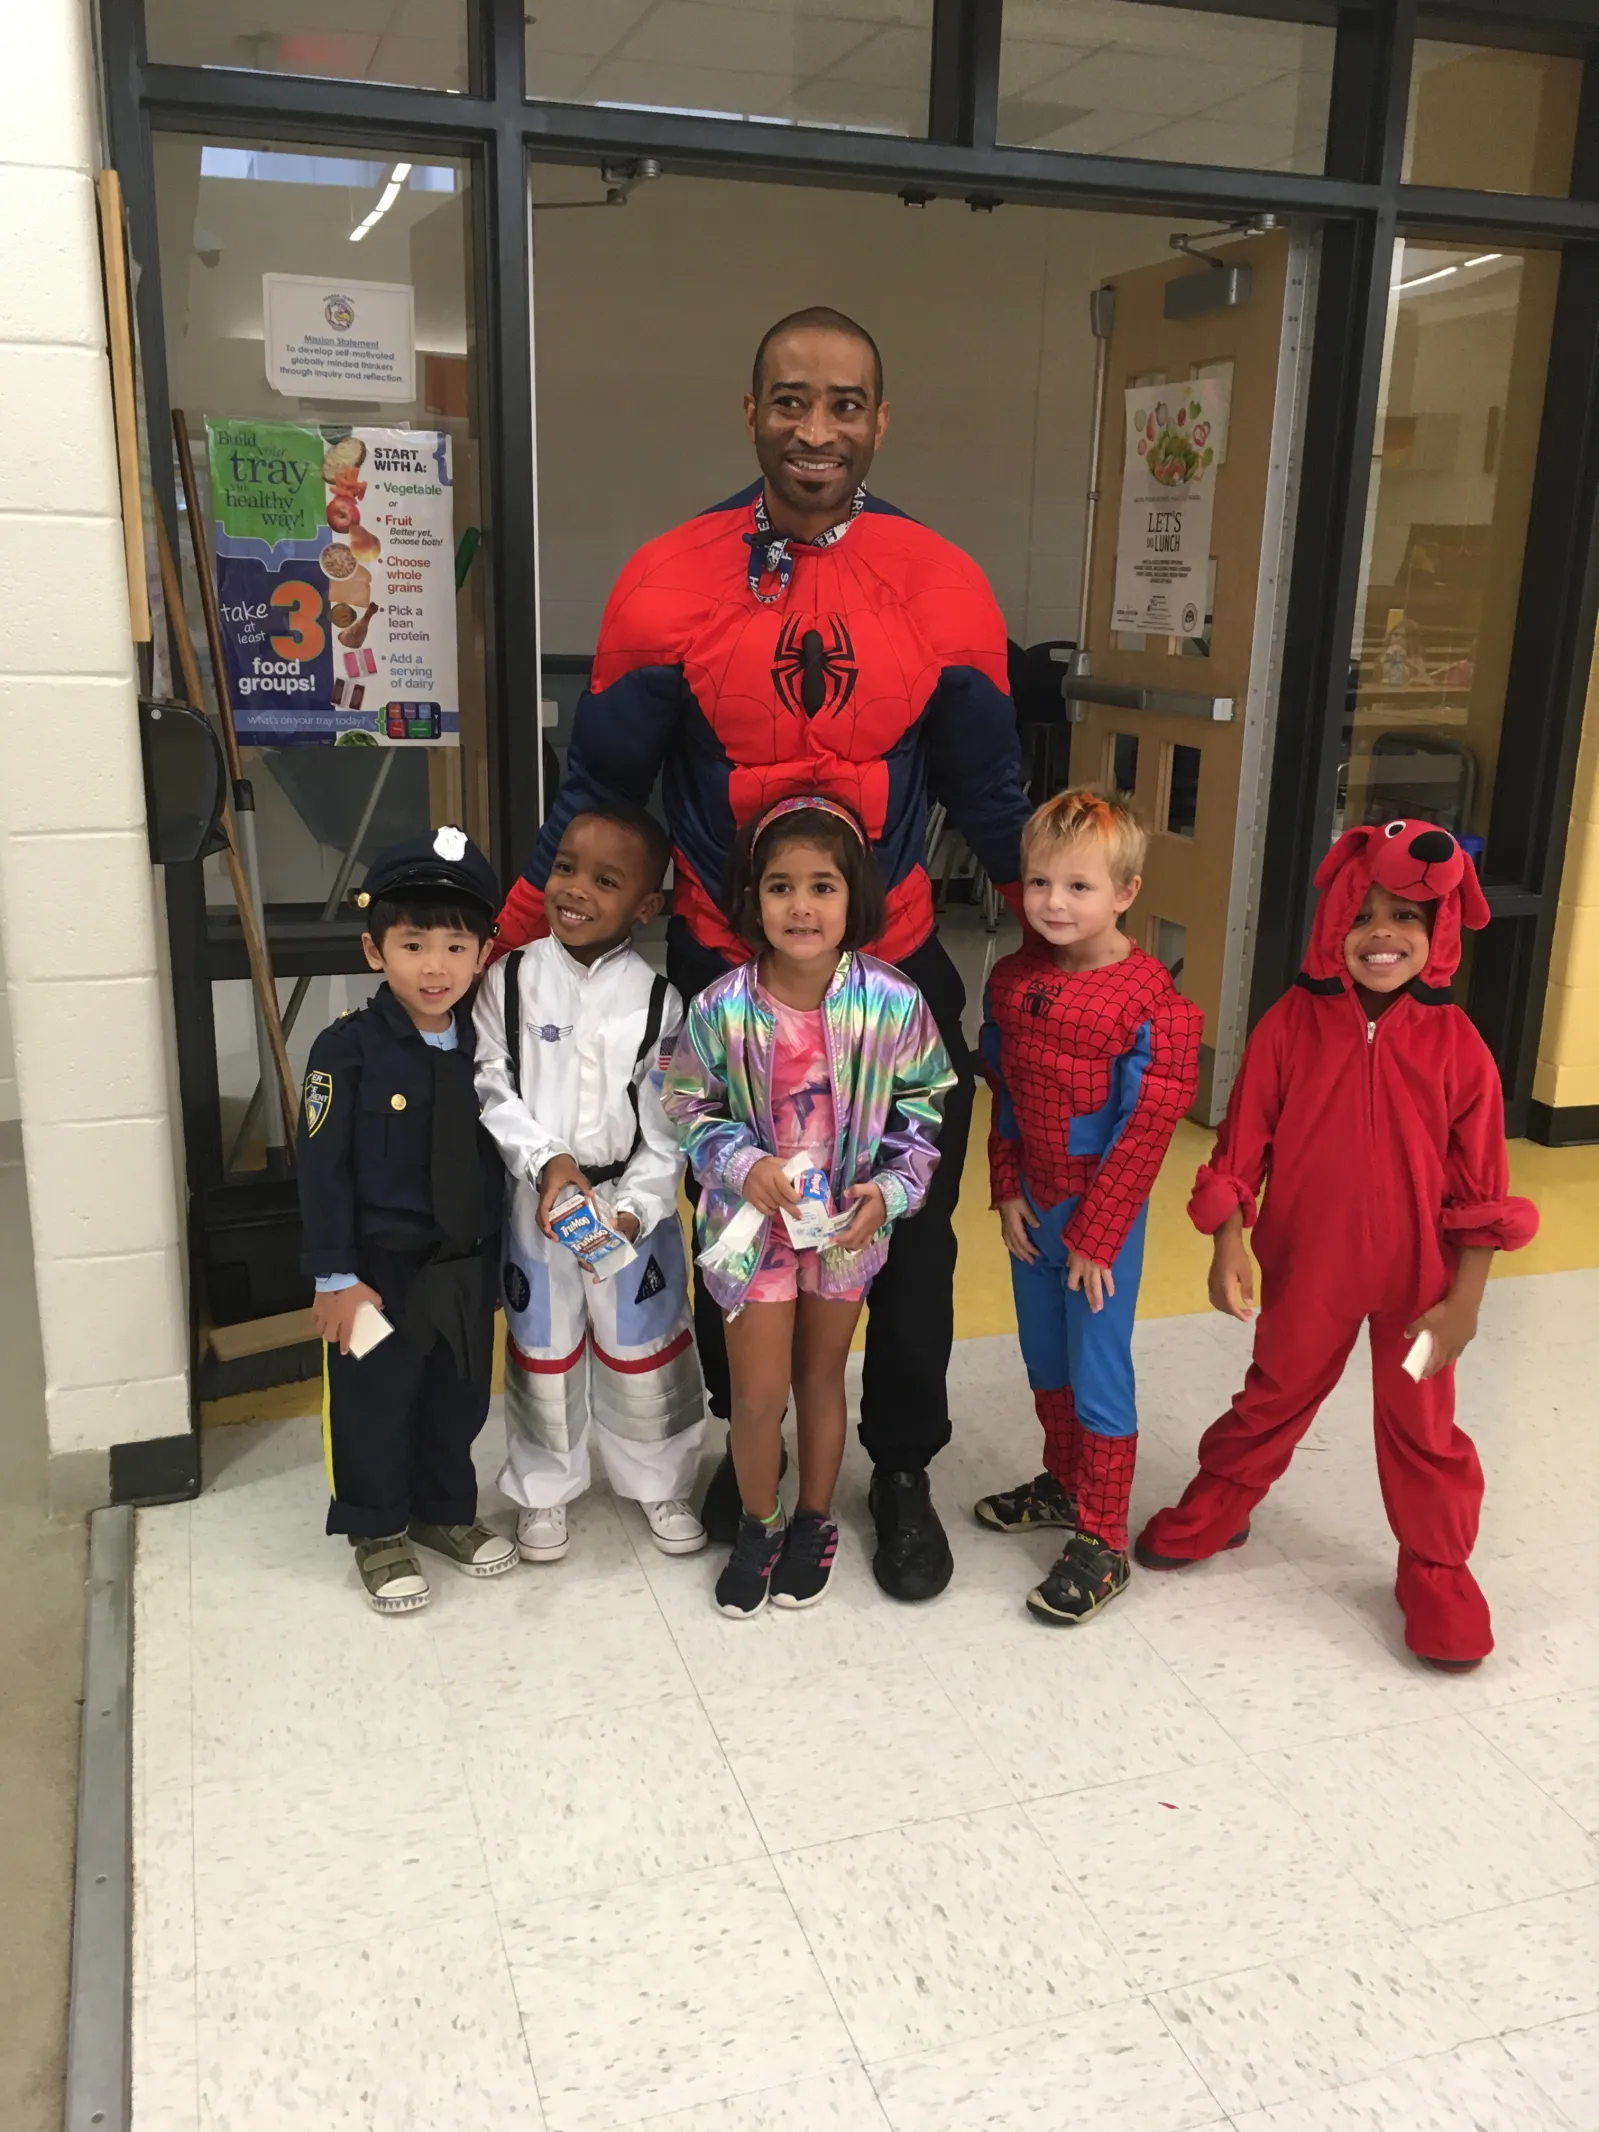 Chef reggie dressed a spiderman with little kids